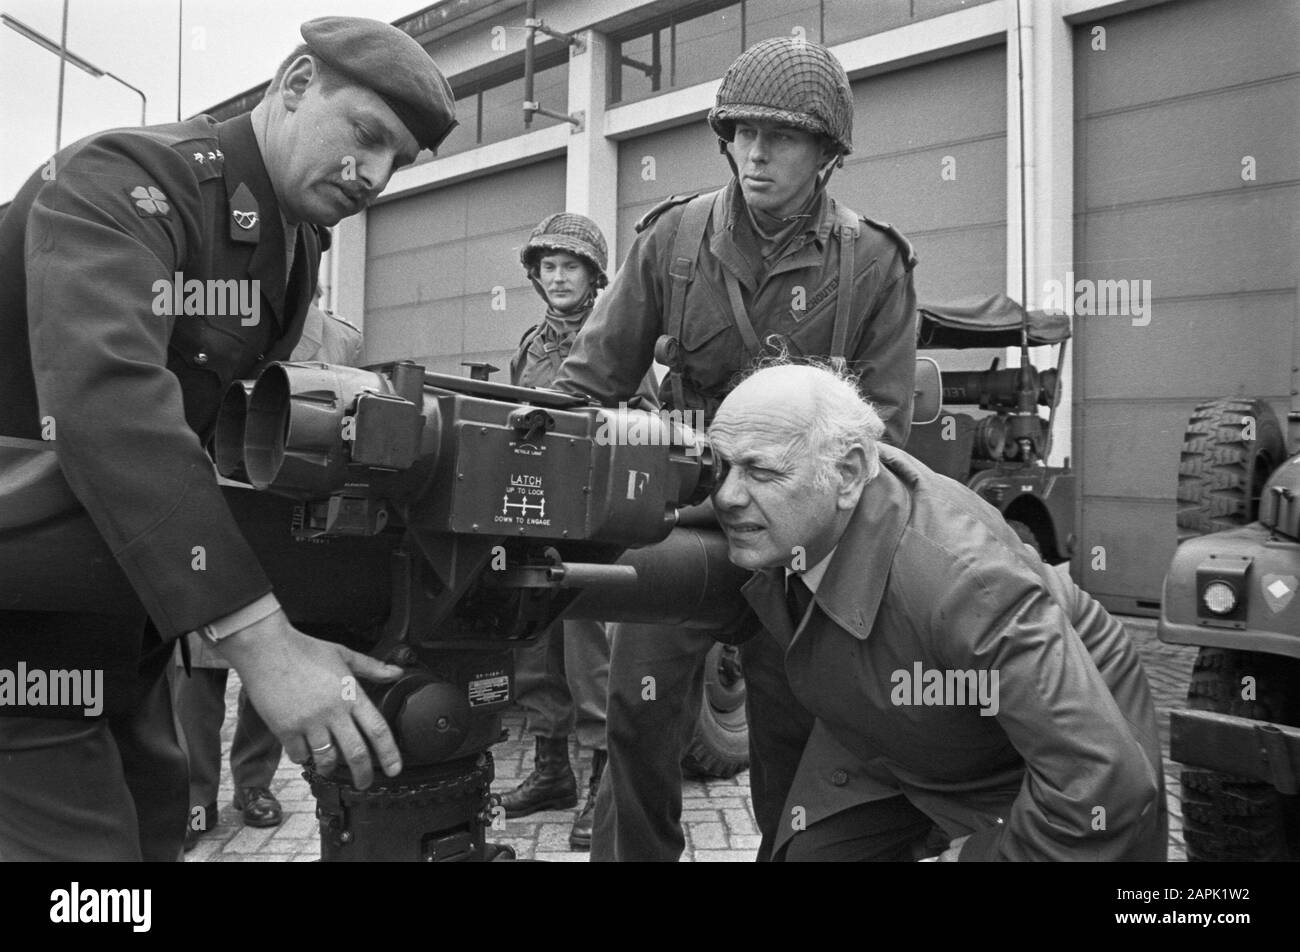 Prime Minister Den Uyl visits the yard Johannes Post in Havelte Description: Den Uyl looks through a viewfinder of a TOW anti-missile installation Annotation: TOW stands for Tube-launched, Optically tracked, Wire-guided Date: 13 April 1977 Location: Drenthe, Havelte Keywords: visits, barracks, armed forces, army, military equipment, military bases, military exercises, minister-presidents Personal name: Uyl, Joop den Stock Photo